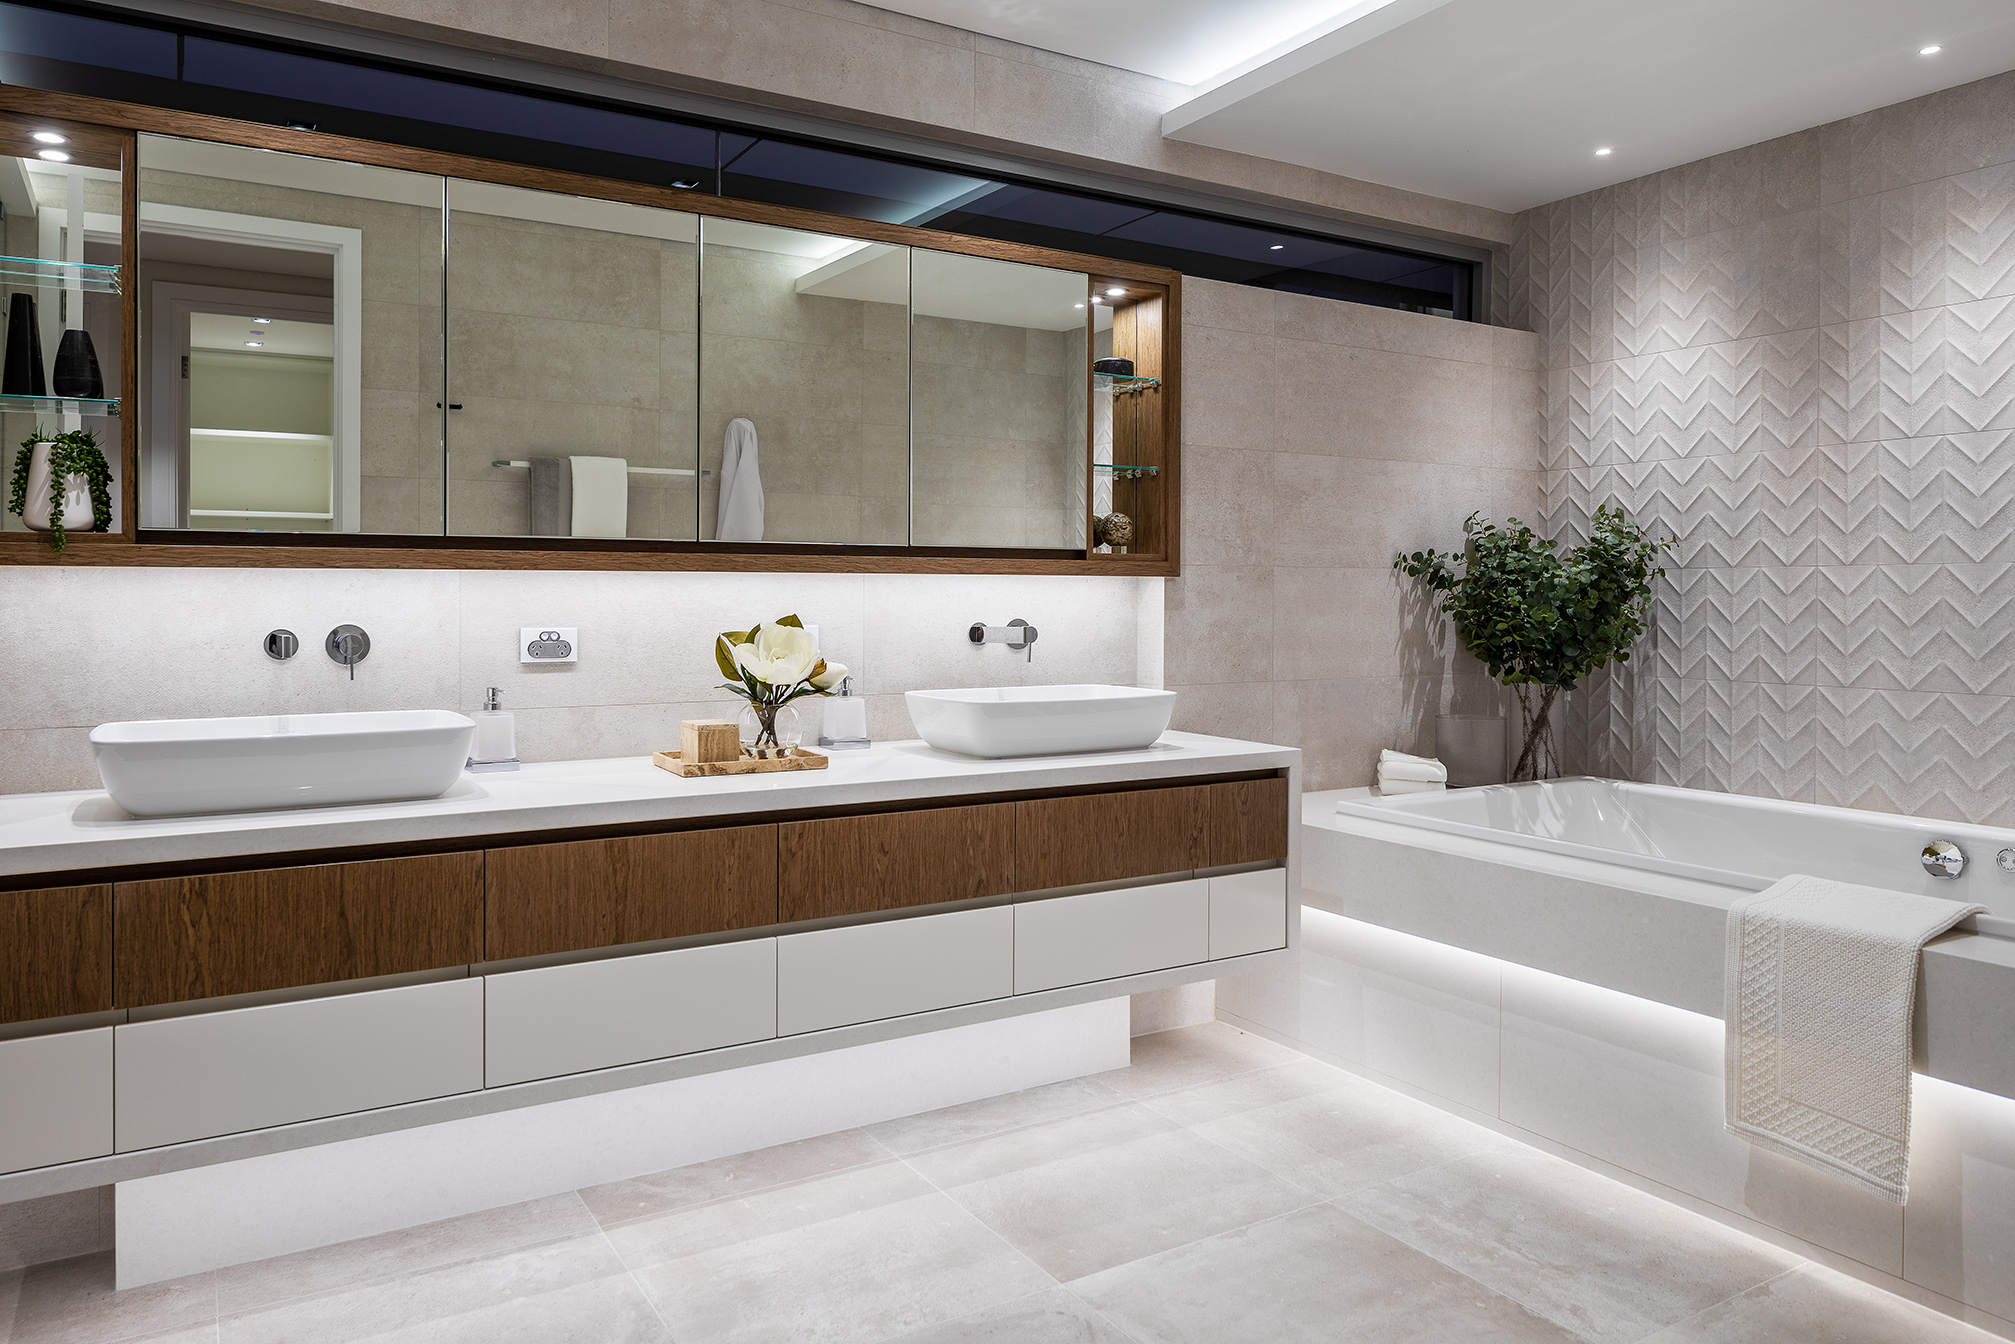 Private ensuite with double basins